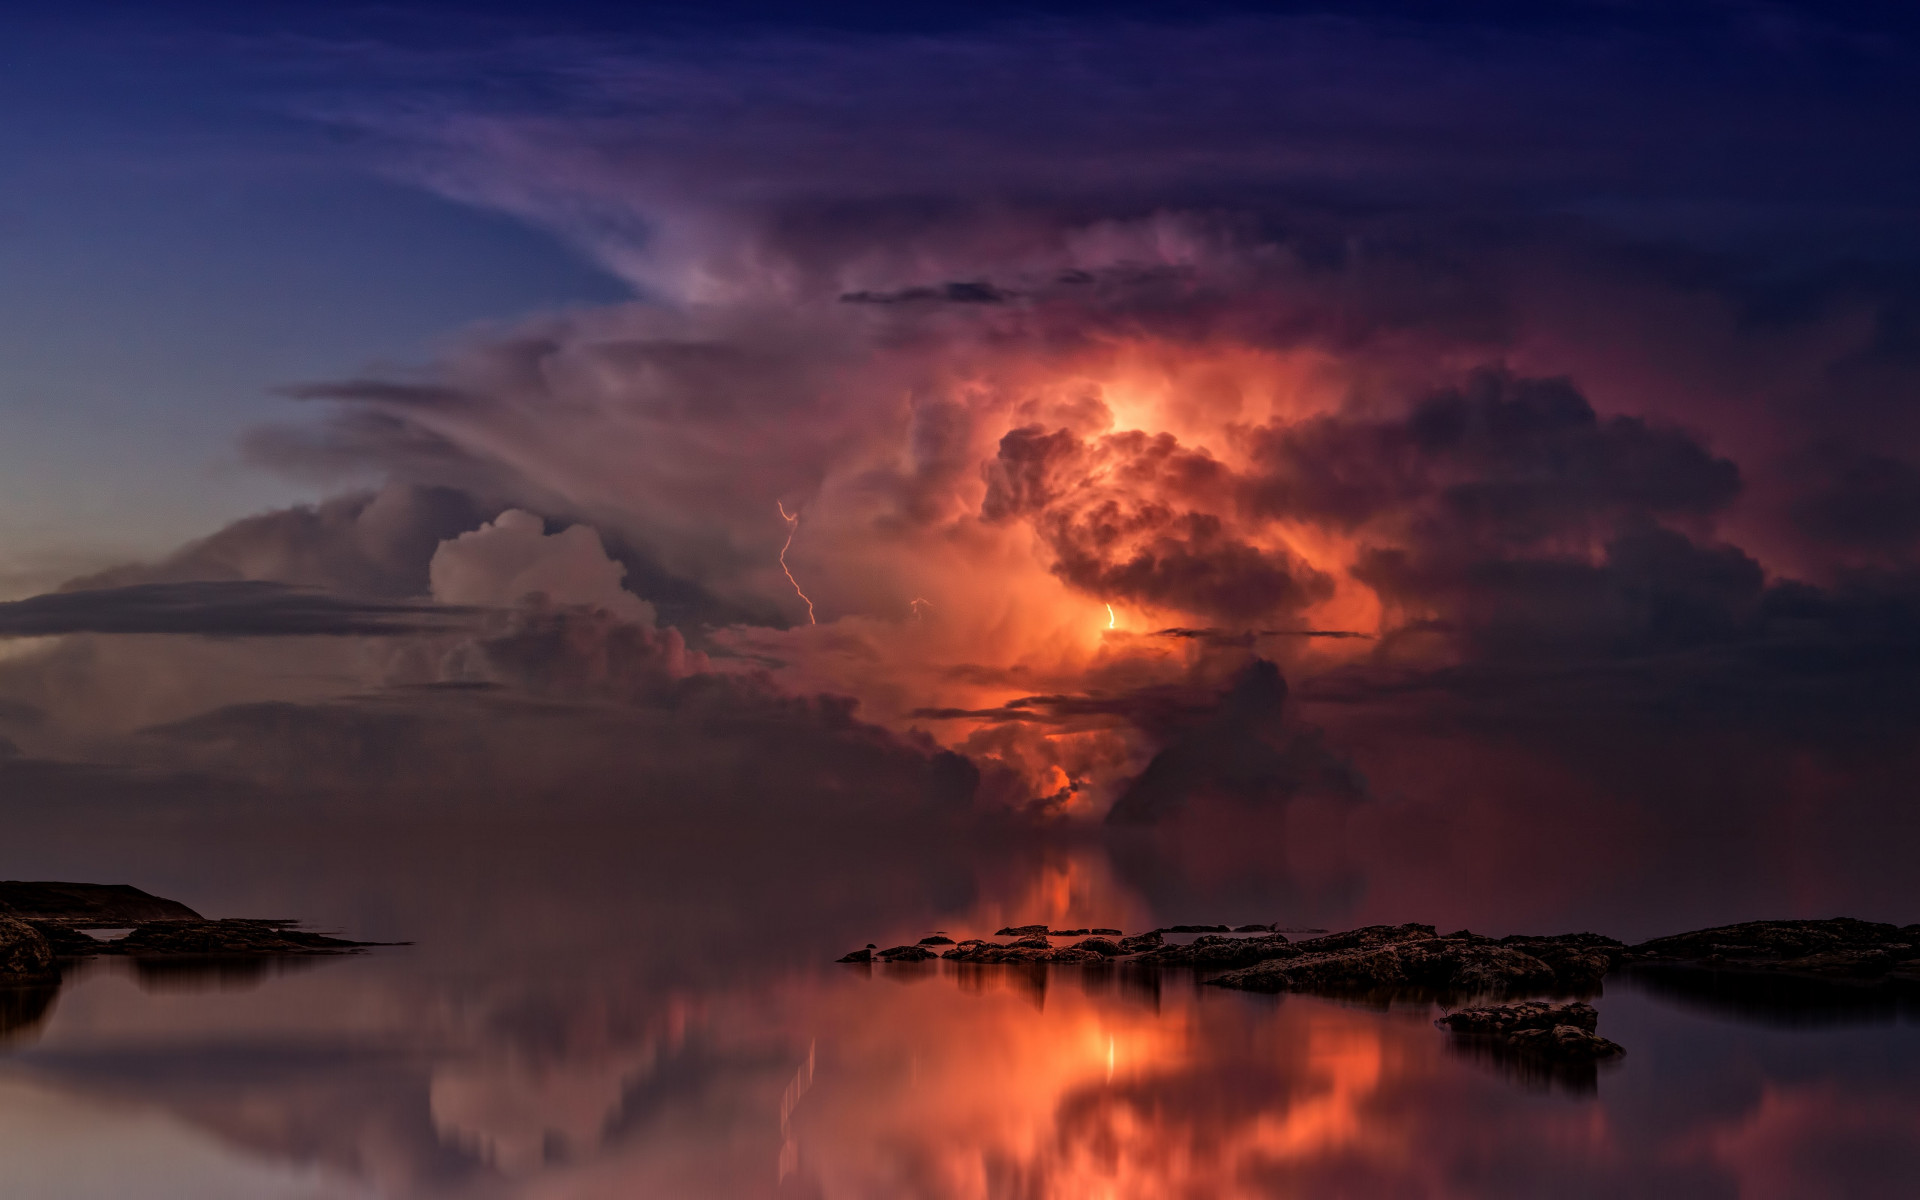 Lightning and thunderstorm in the sky wallpaper 1920x1200